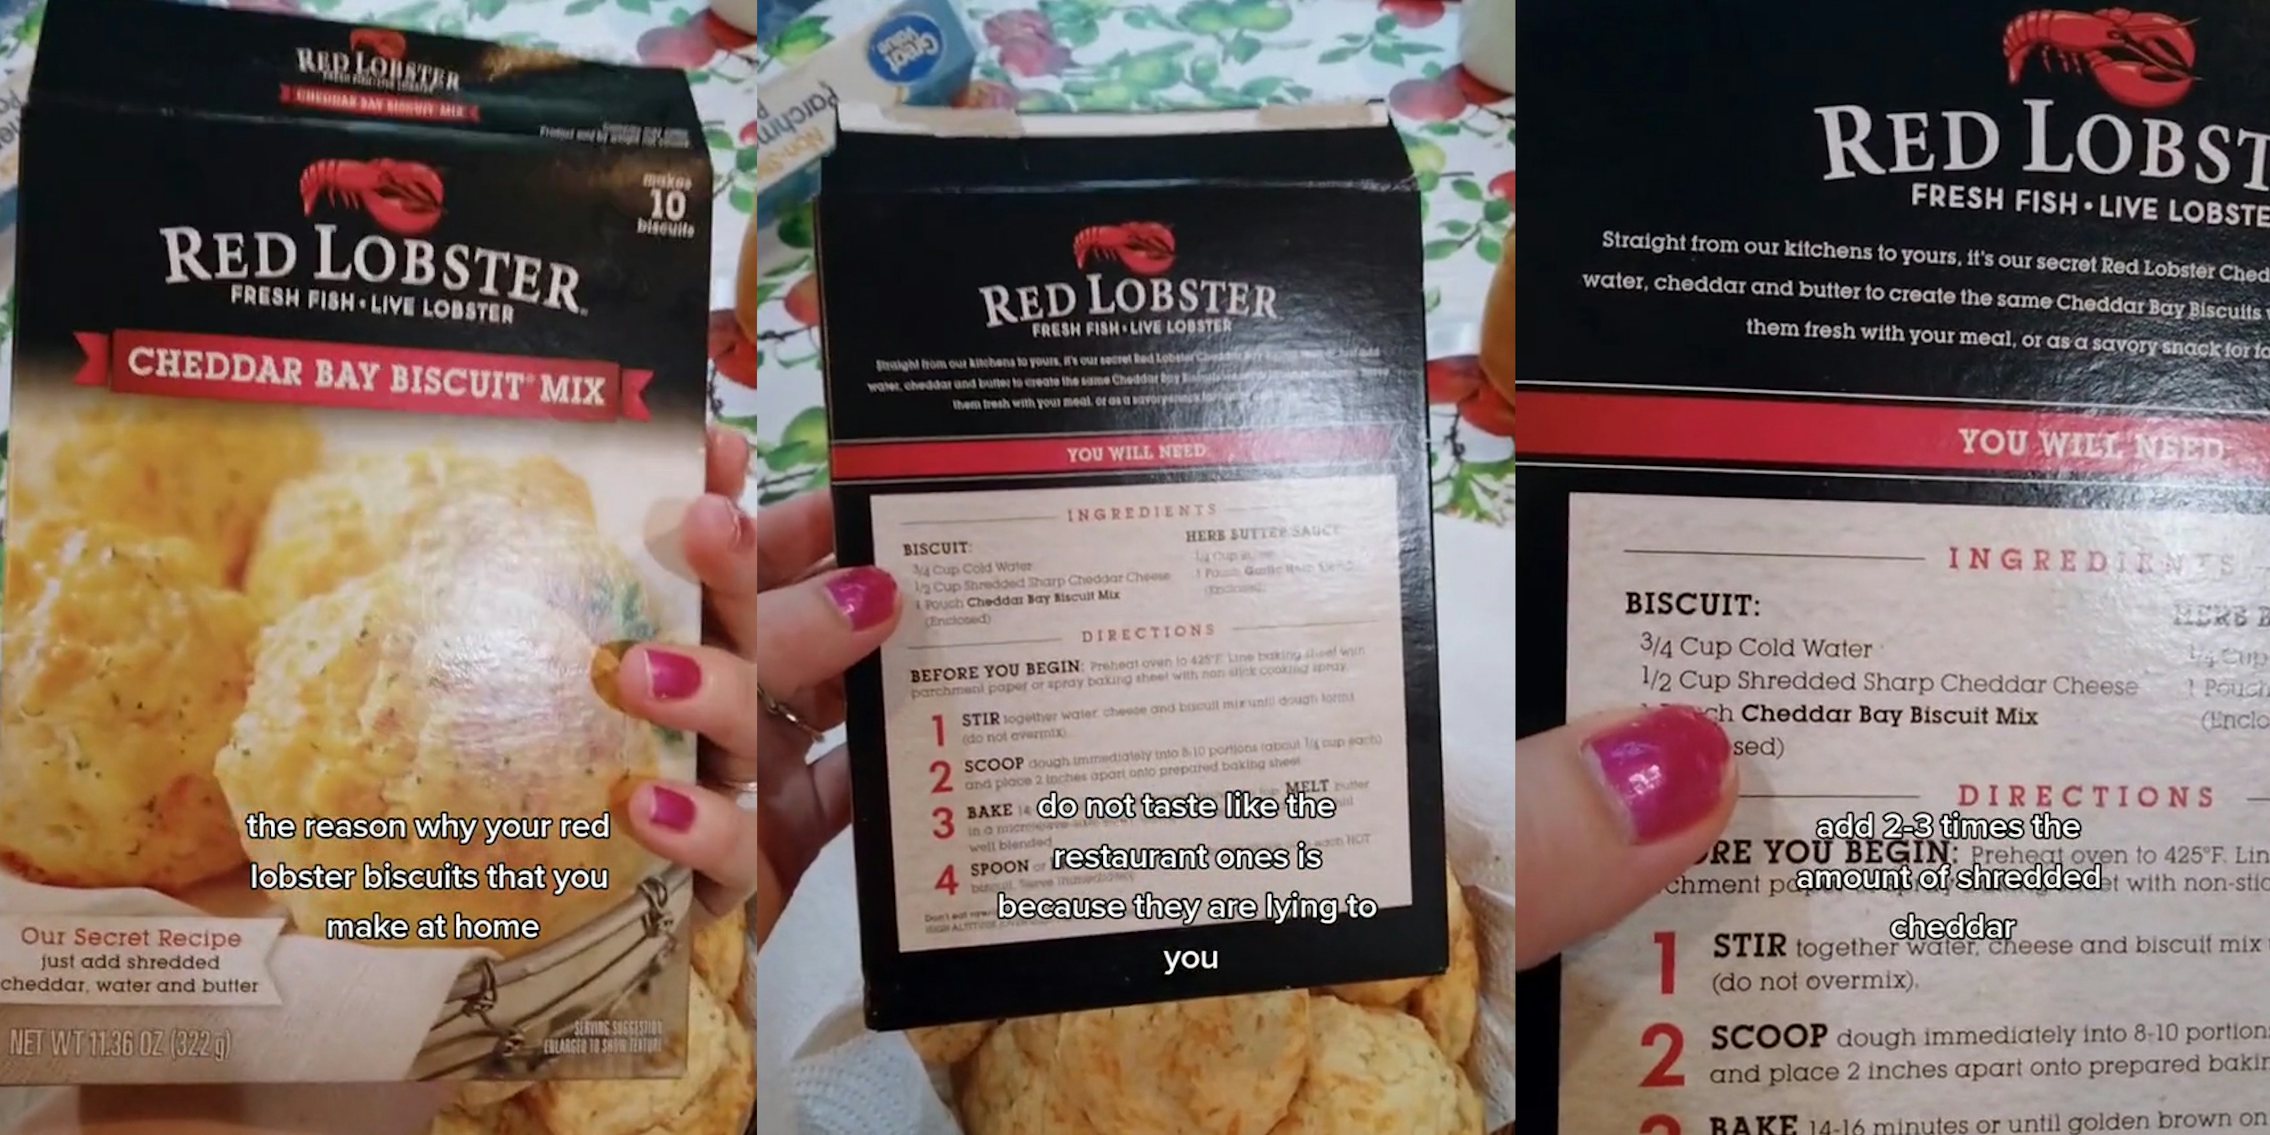 Red Lobster Cheddar Bay Biscuit Mix packaging with caption 'the reason why your red lobster biscuits that you make at home' (l) Red Lobster Cheddar Bay Biscuit Mix packaging with caption 'do not taste like the restaurant ones is because they are lying to you' (c) Red Lobster Cheddar Bay Biscuit Mix packaging with caption 'ad 2-3 times the amount of shredded cheddar' (r)